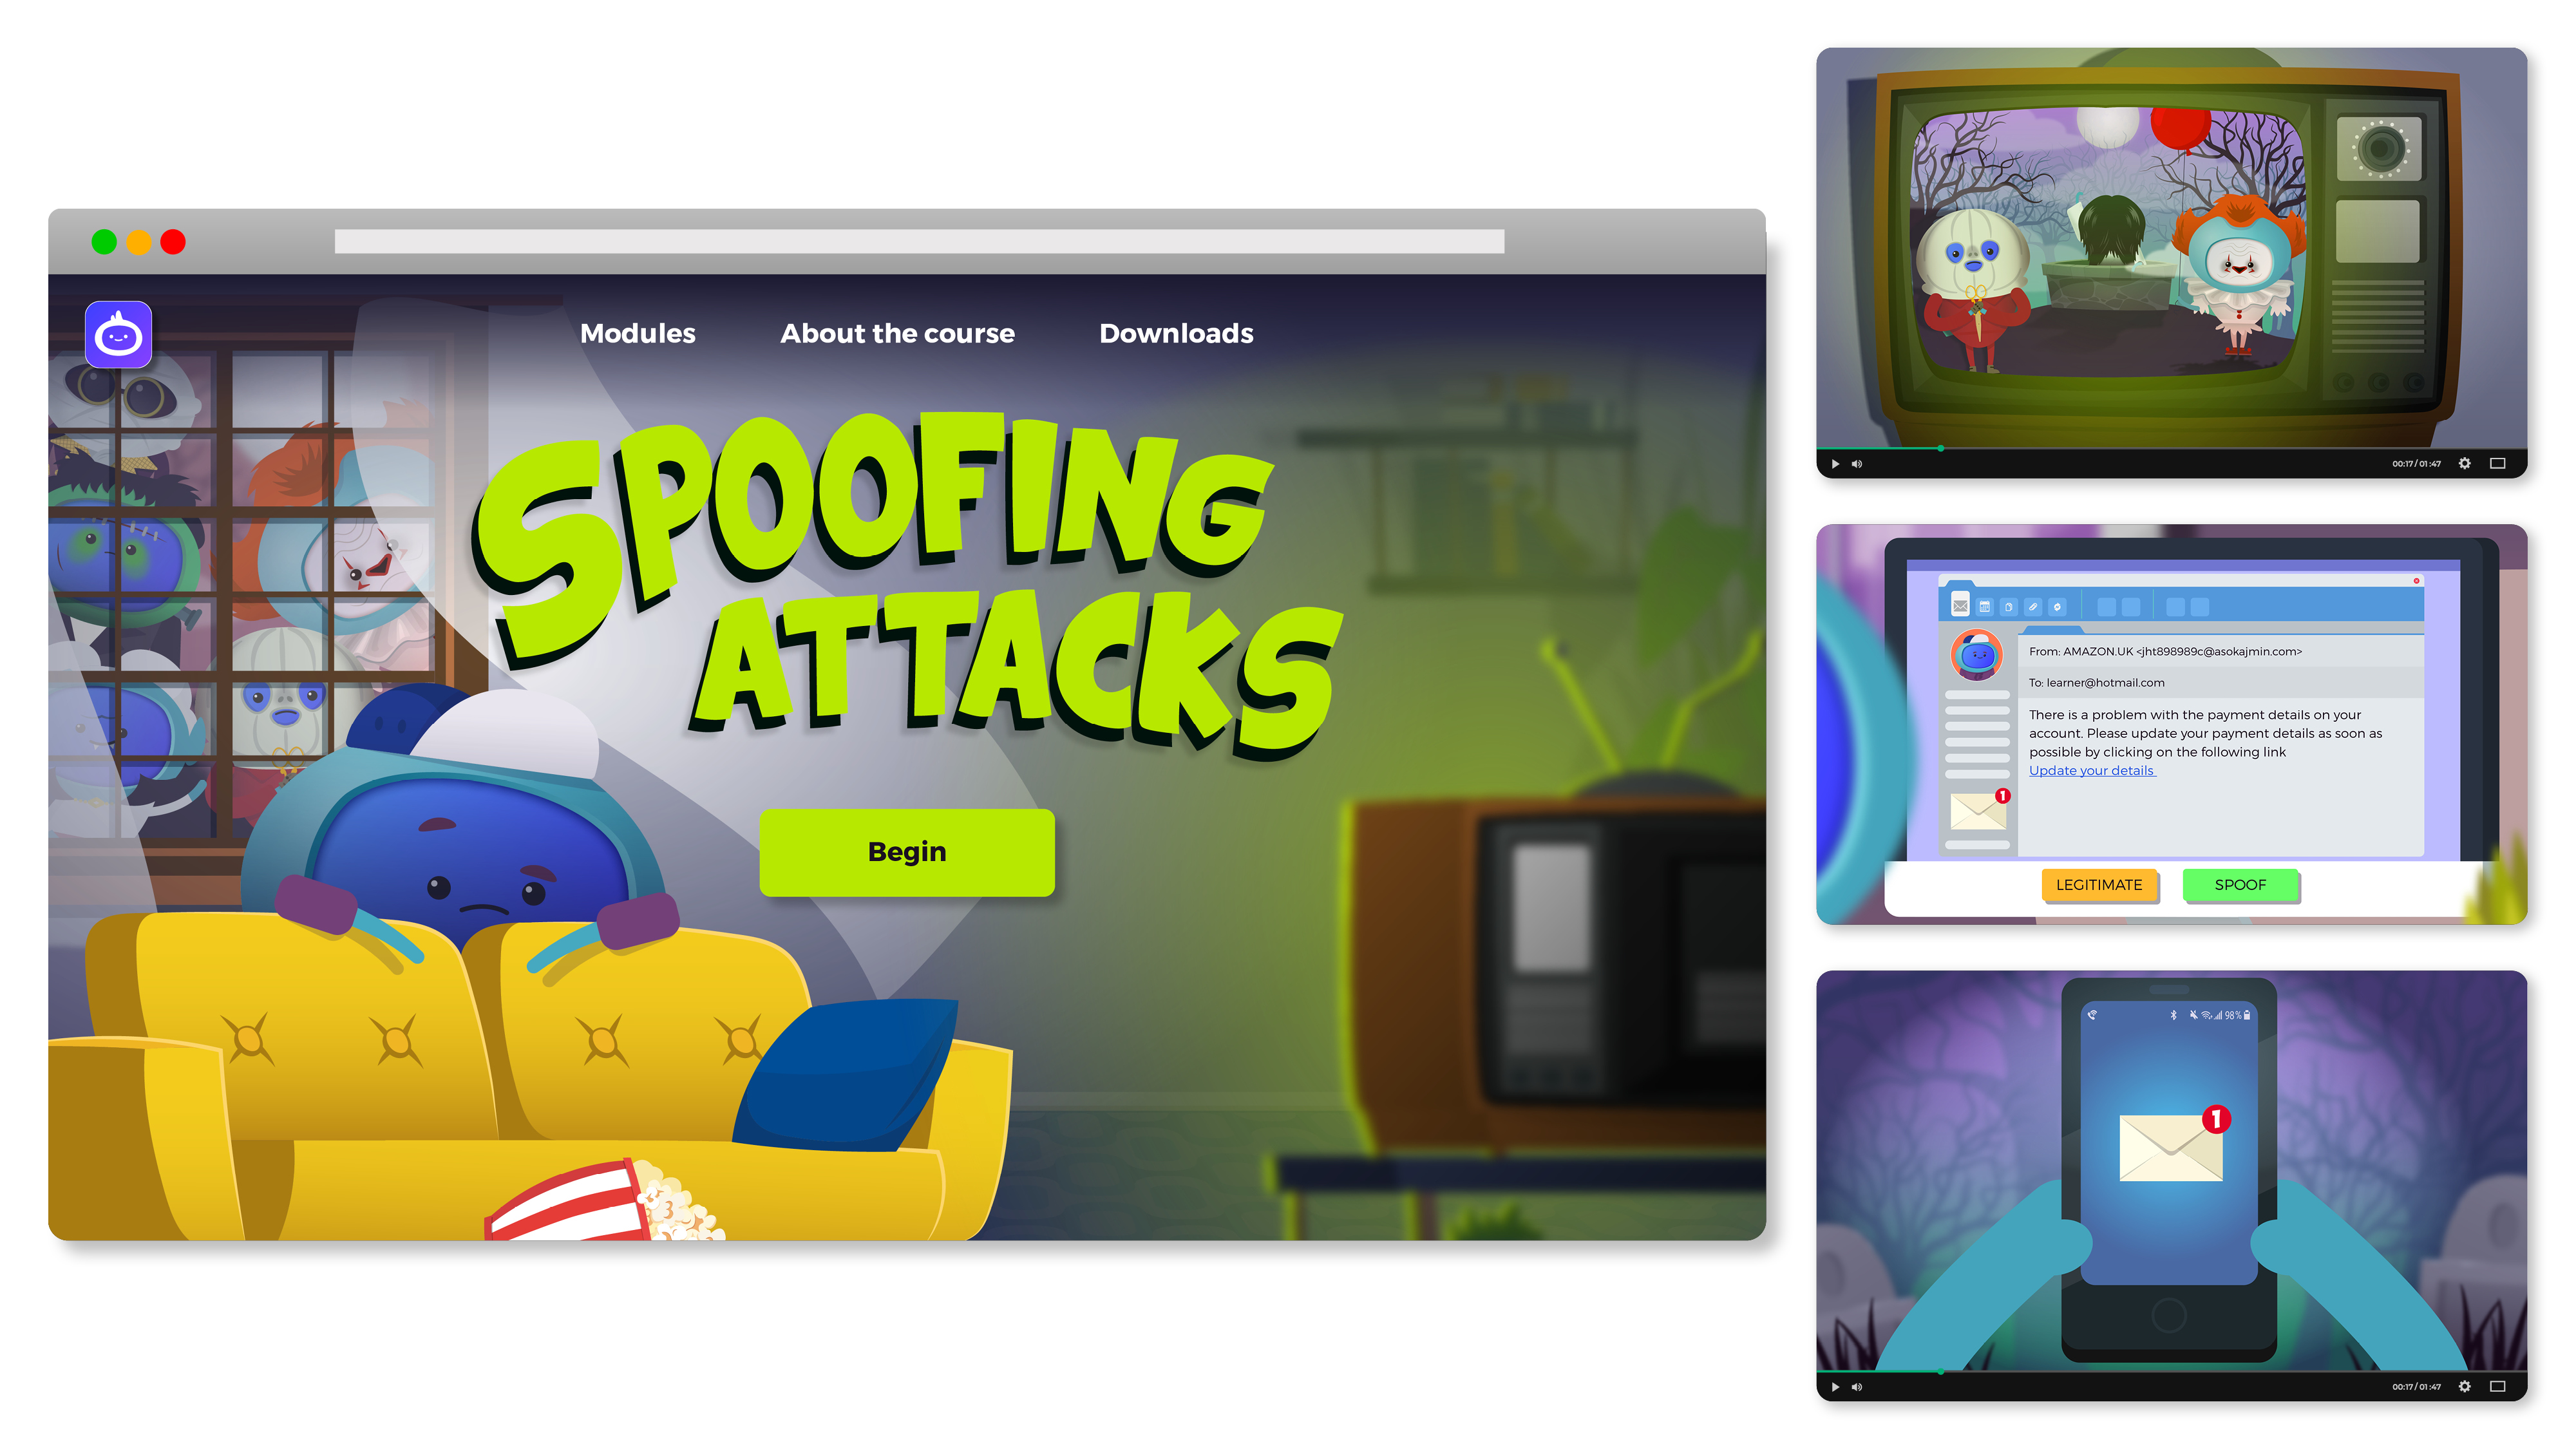 iAM Spoofing Attacks Landing Page Image